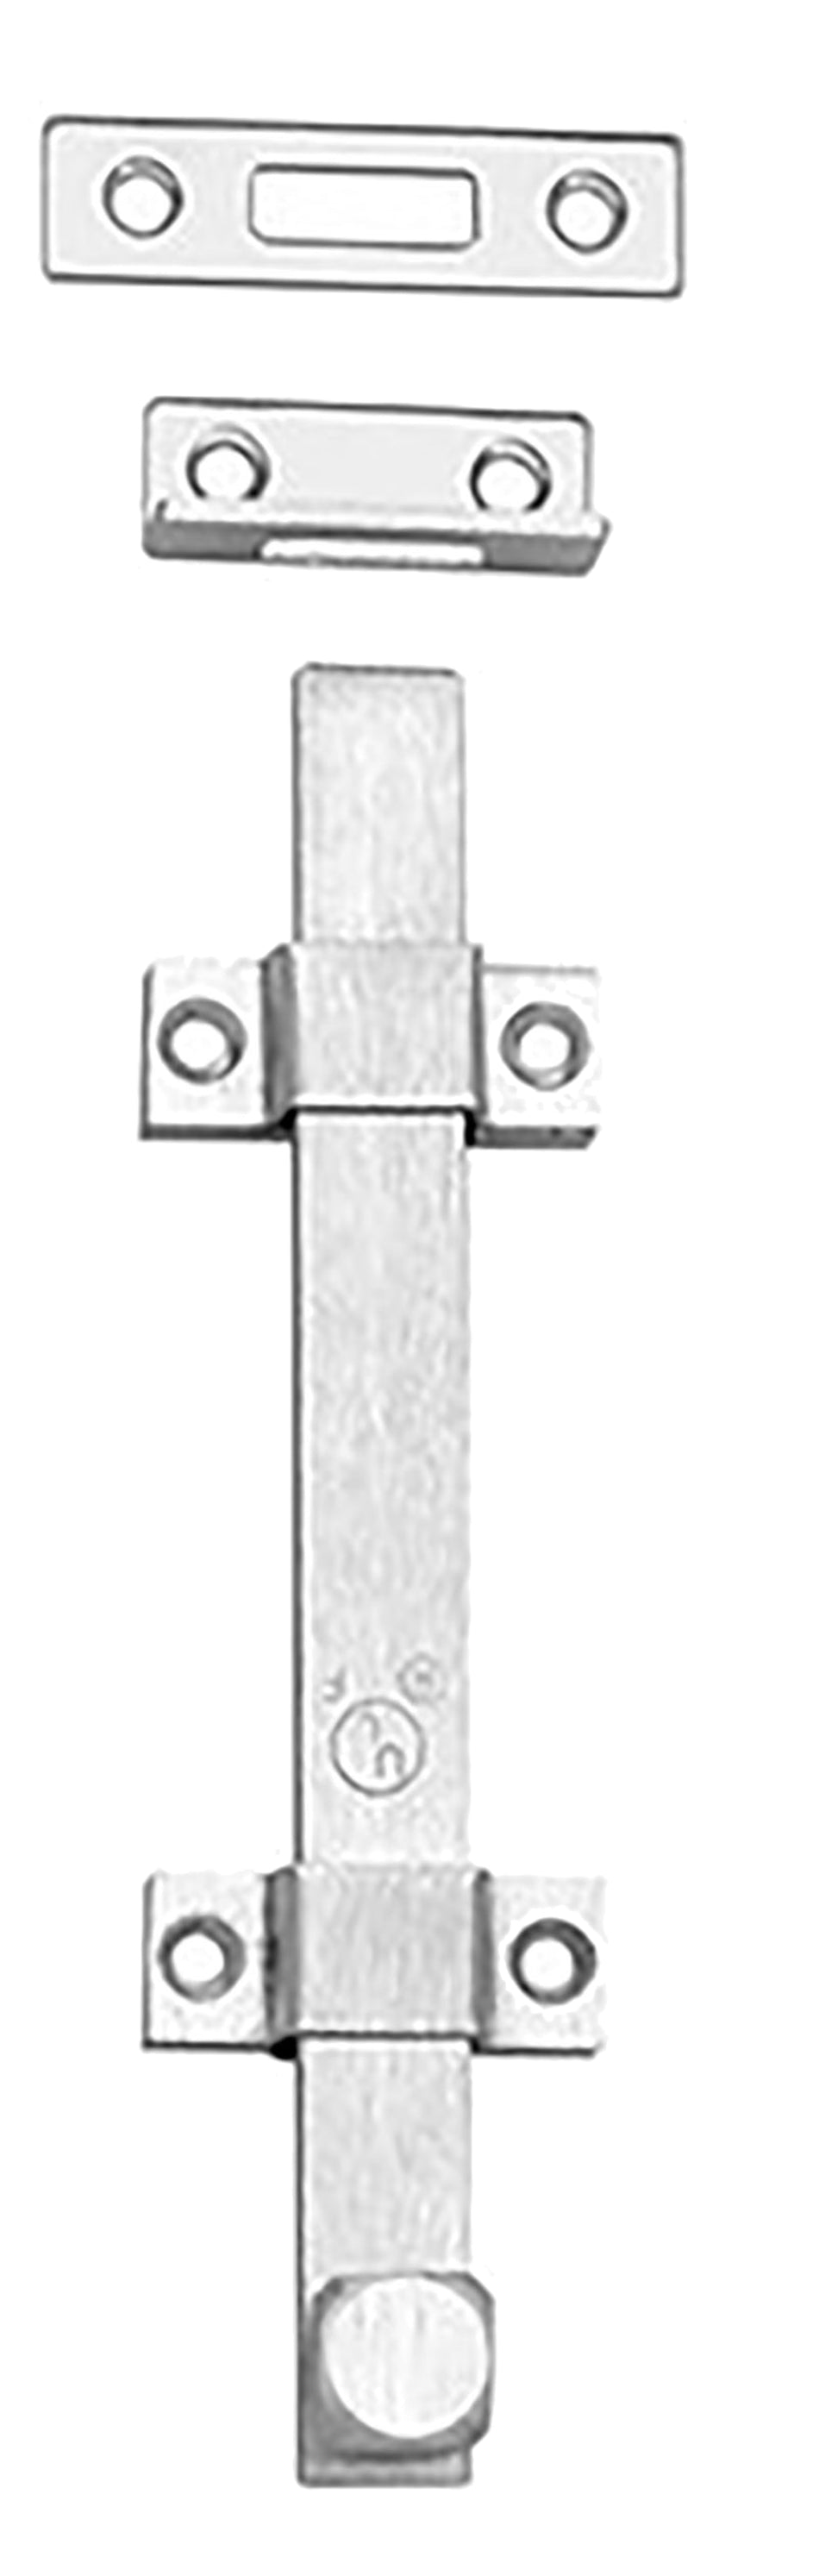 580-8 US26D Rockwood Latches, Catches and Bolts